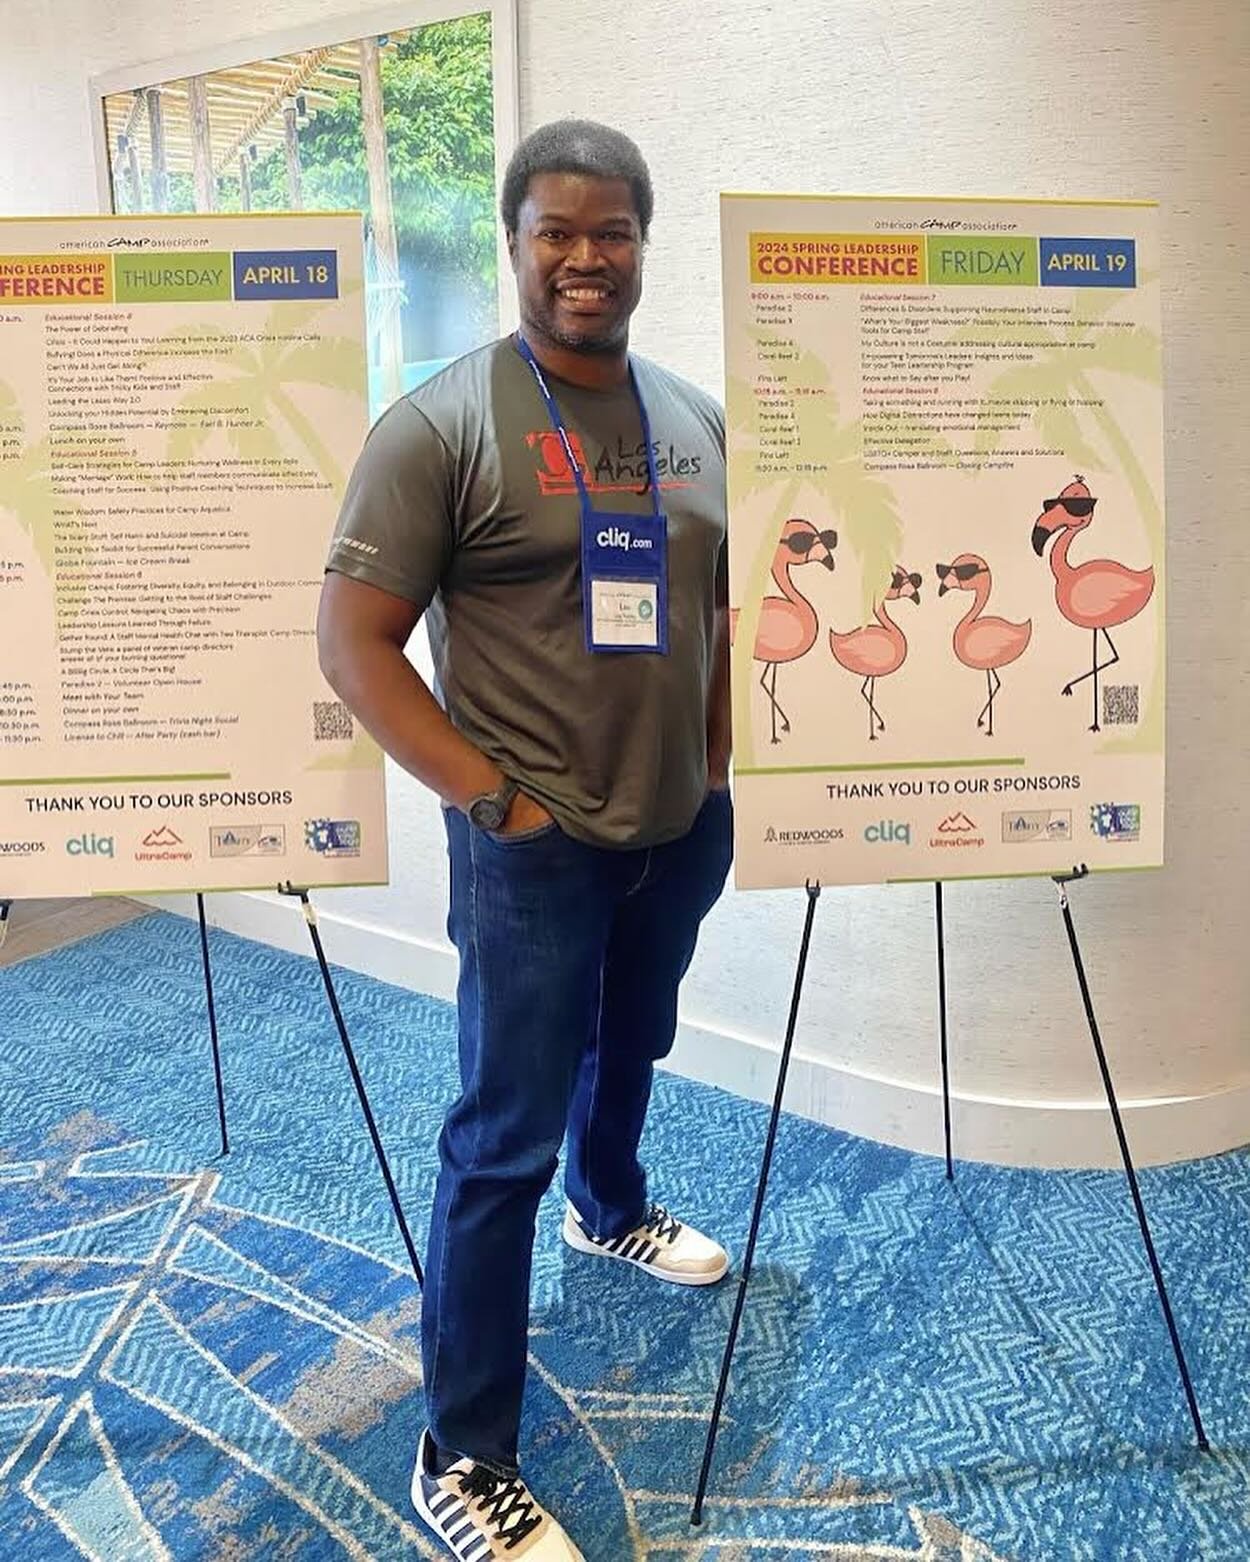 Our Program Supervisor, Lou had a blast at the @acacamps conference in Palm Springs, soaking in the latest insights and connecting with fellow camp enthusiasts! 🏕️

Lou thoroughly enjoyed the keynote session presented by @blackfolkscamptoo highlight